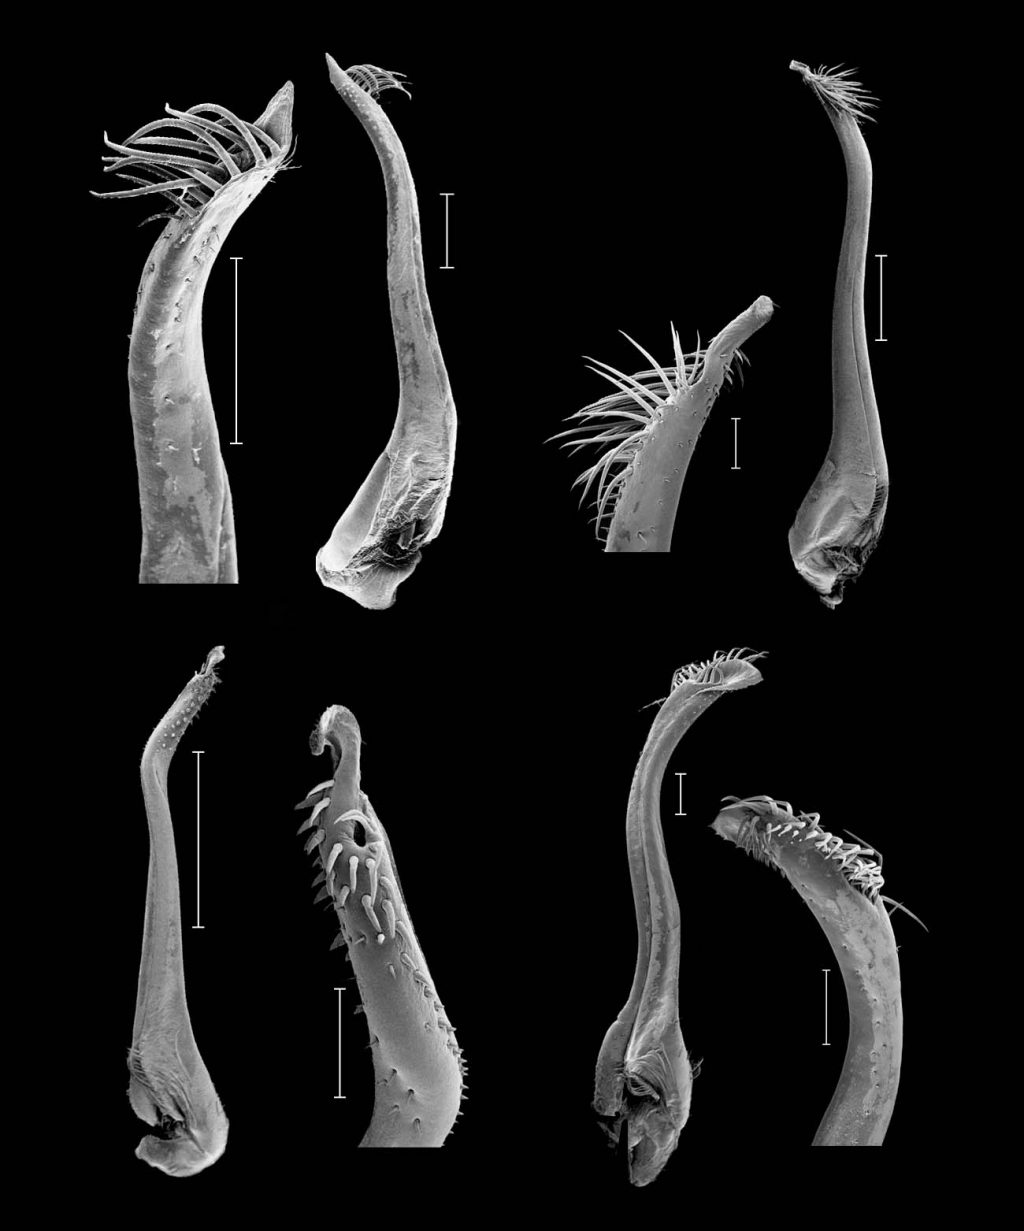 Electron micrographs of crab gonopods from four species